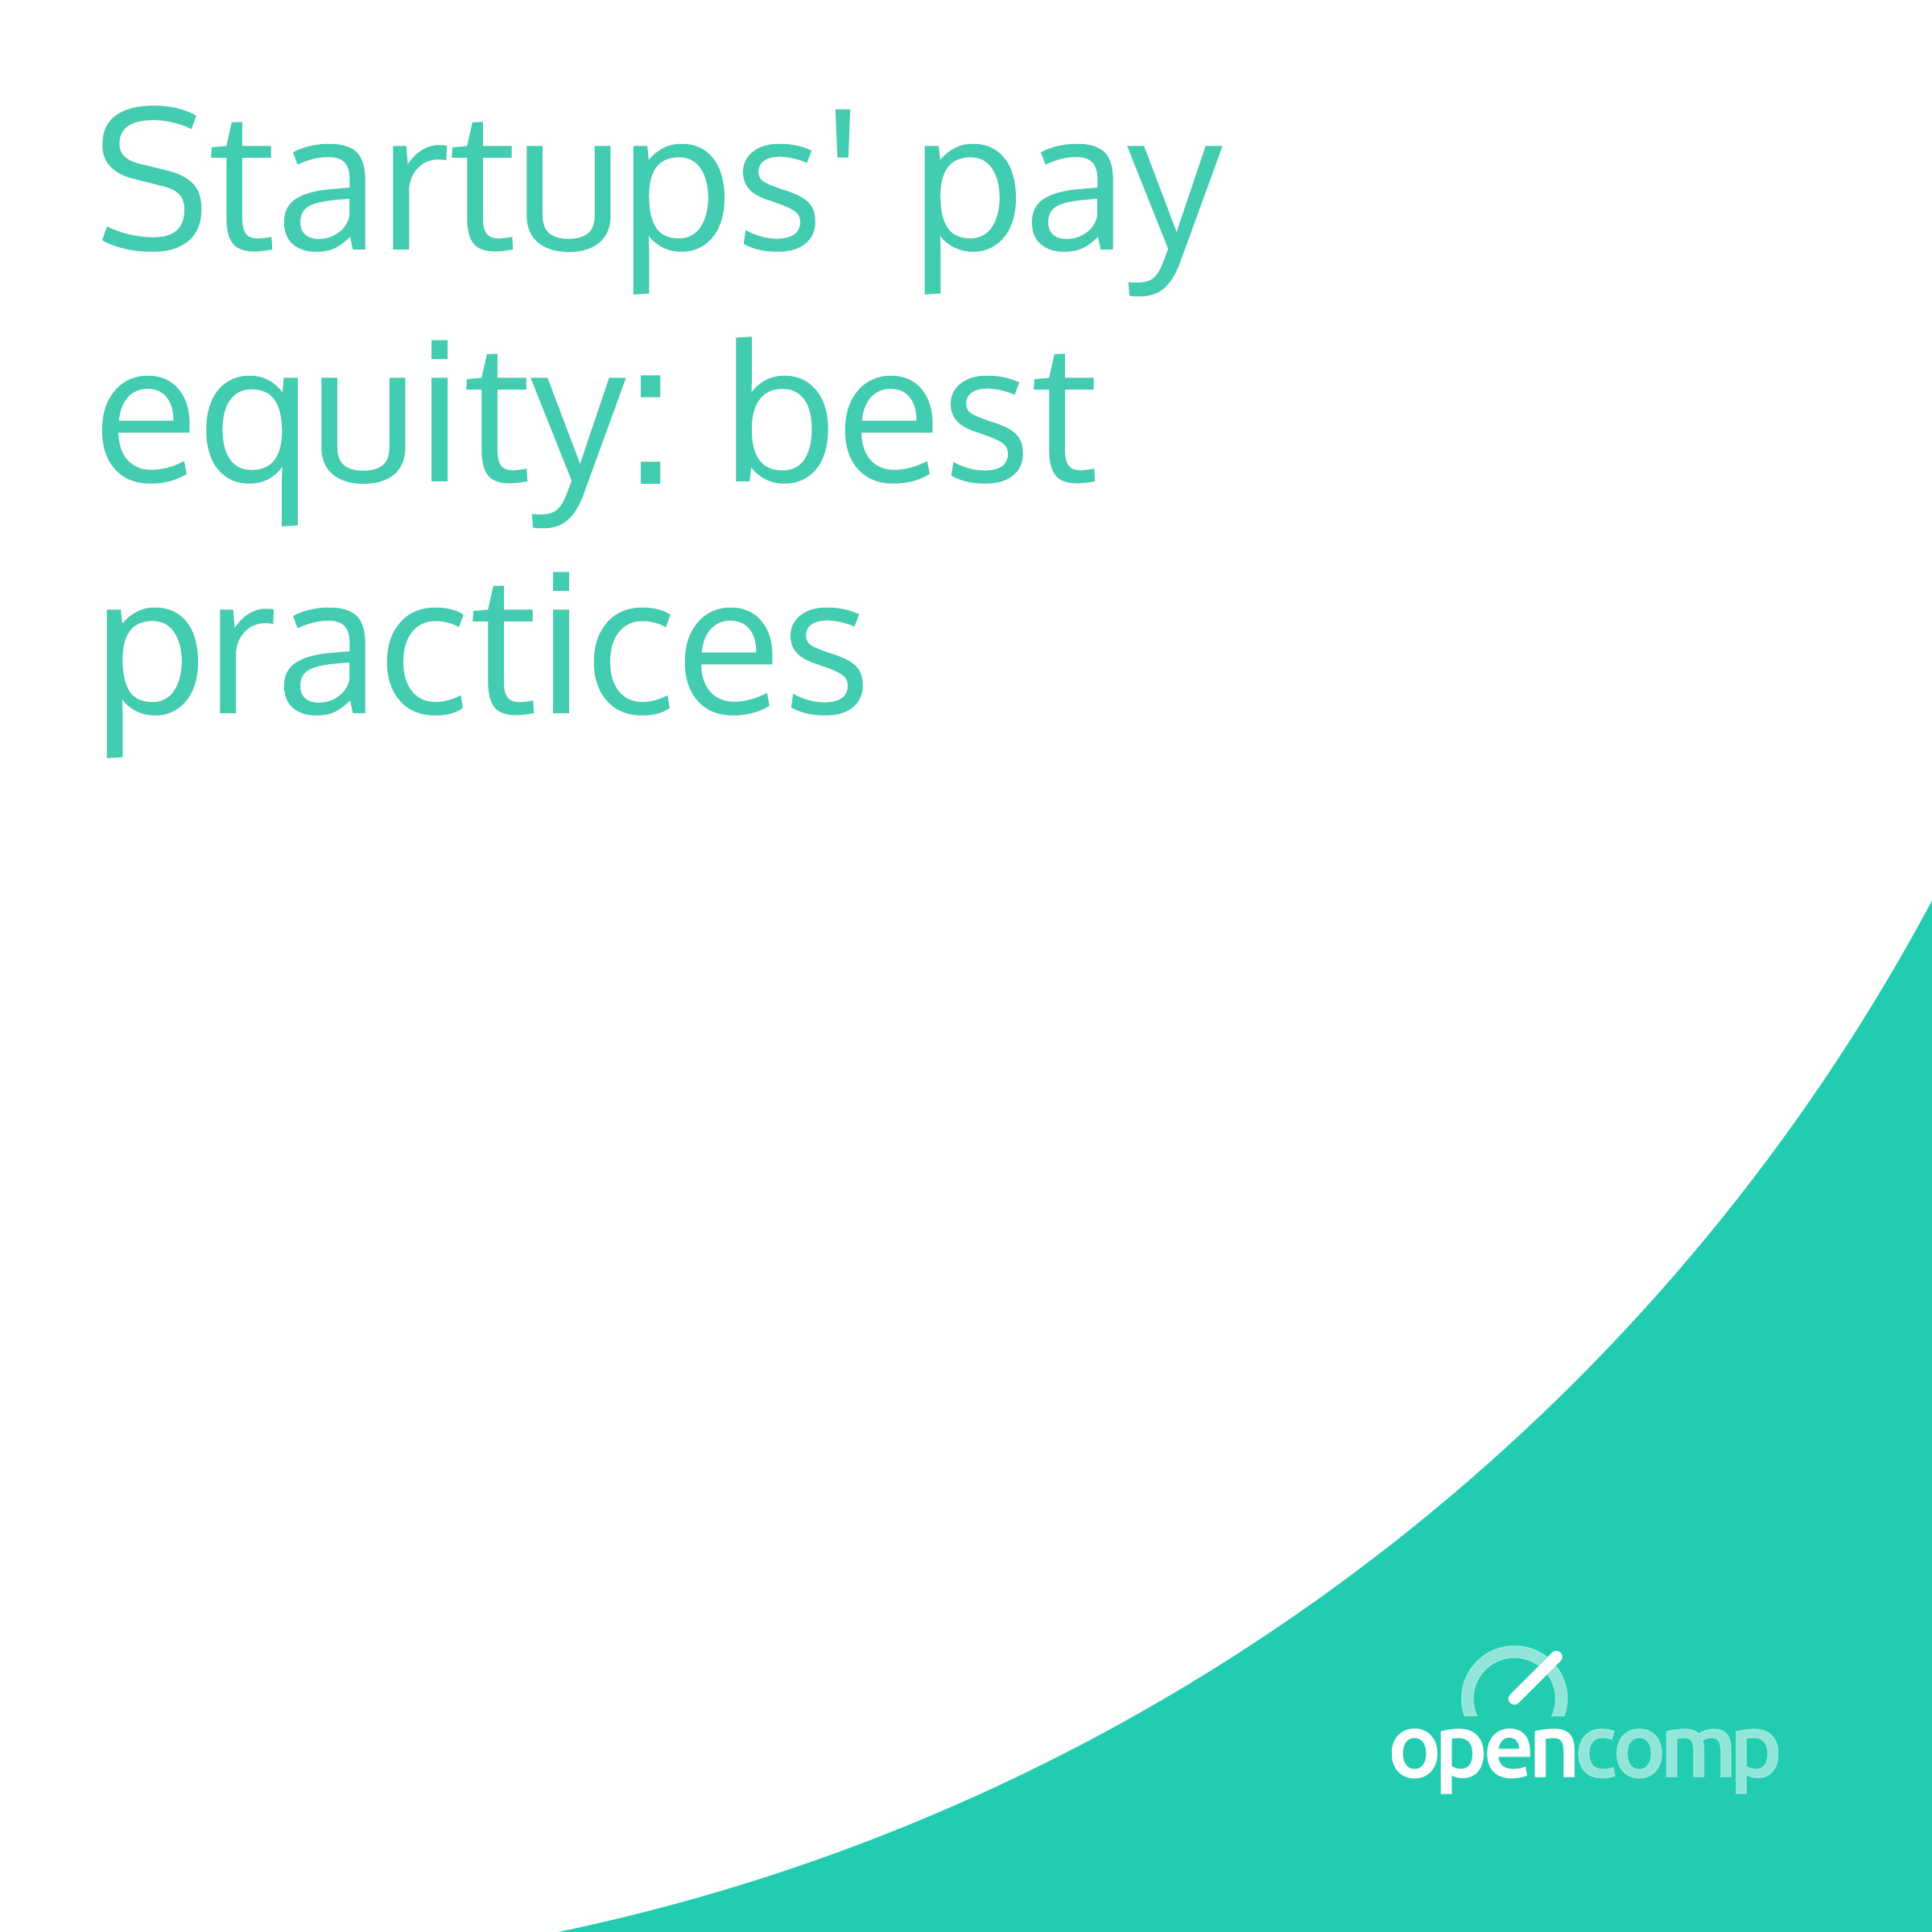 Pay Equity Best Practices: A Guide for Startup CEOs